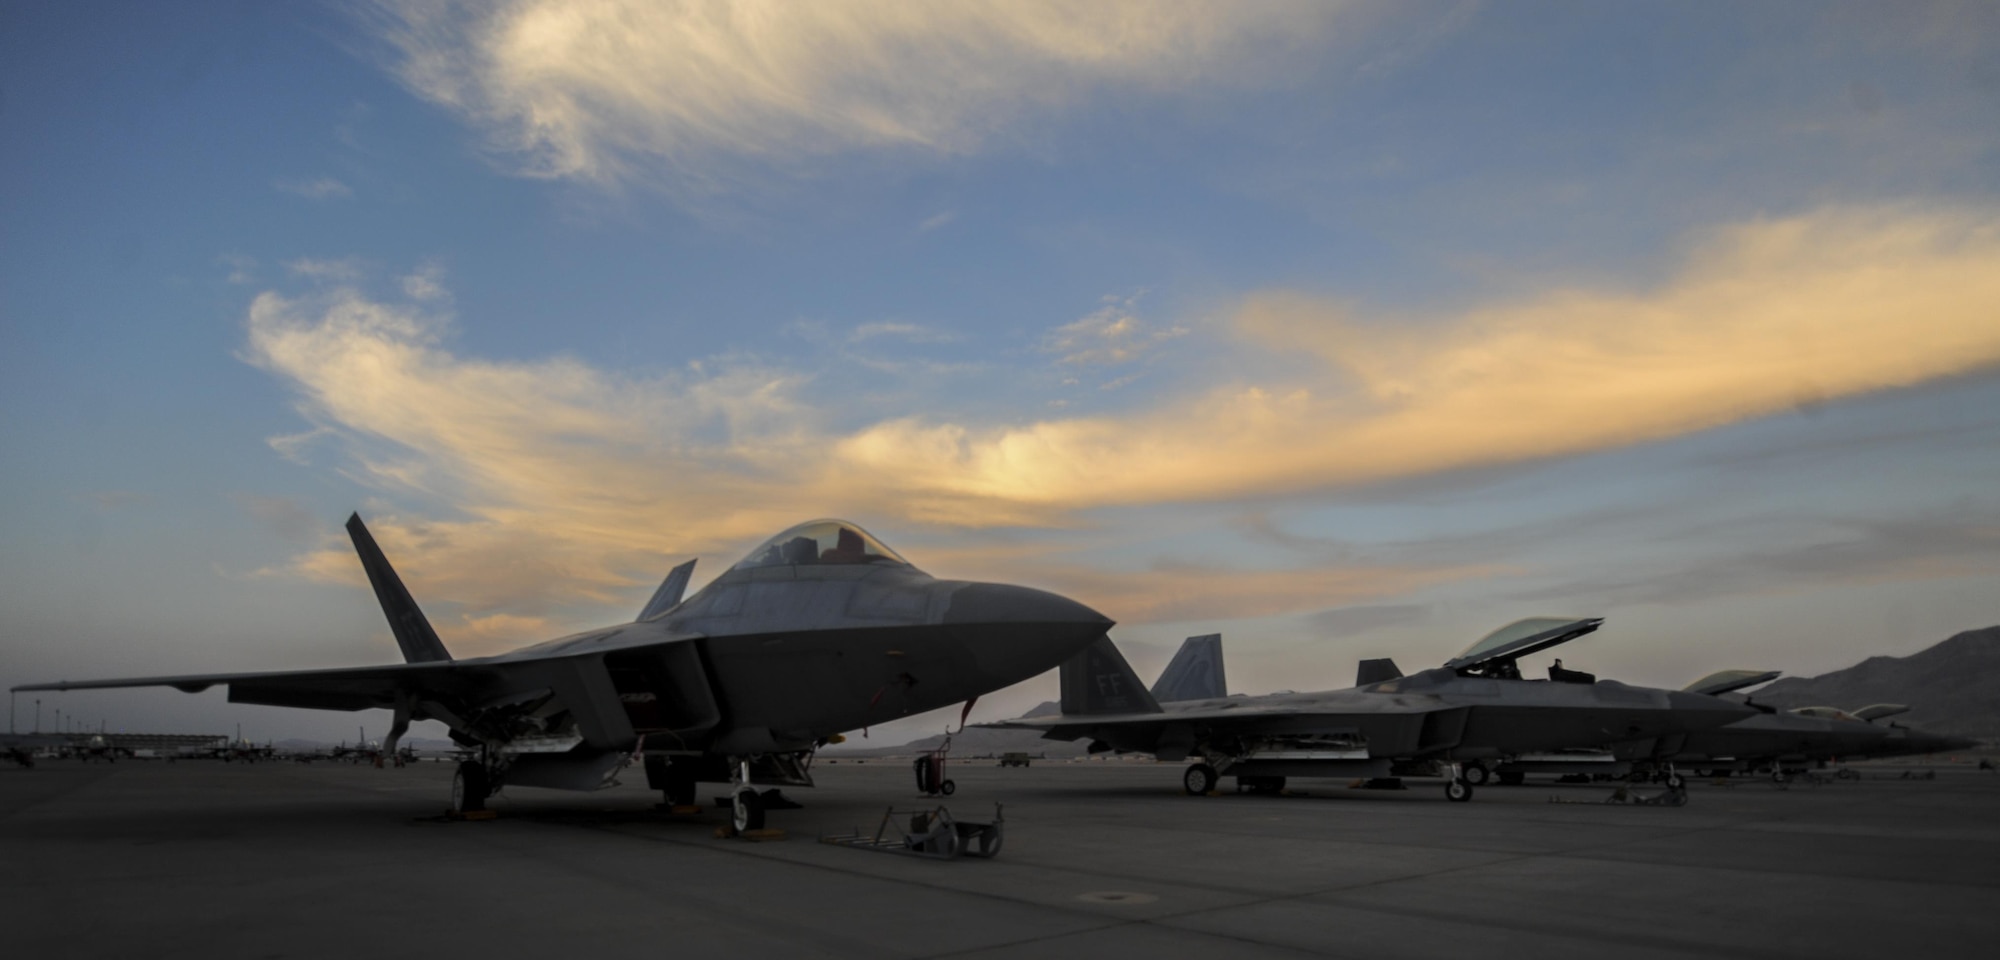 F-22A Raptors, assigned to the 27th Fighter Squadron, Joint Base Langley-Eustis, Va., sits on the runway before takeoff during Red Flag 16-3 at Nellis Air Force Base, July 25, 2016. In addition to daytime operations, Red Flag conducts training exercises during hours of darkness to train for low visibility environment. (U.S. Air Force photo by Airman 1st Class Kevin Tanenbaum/Released) 